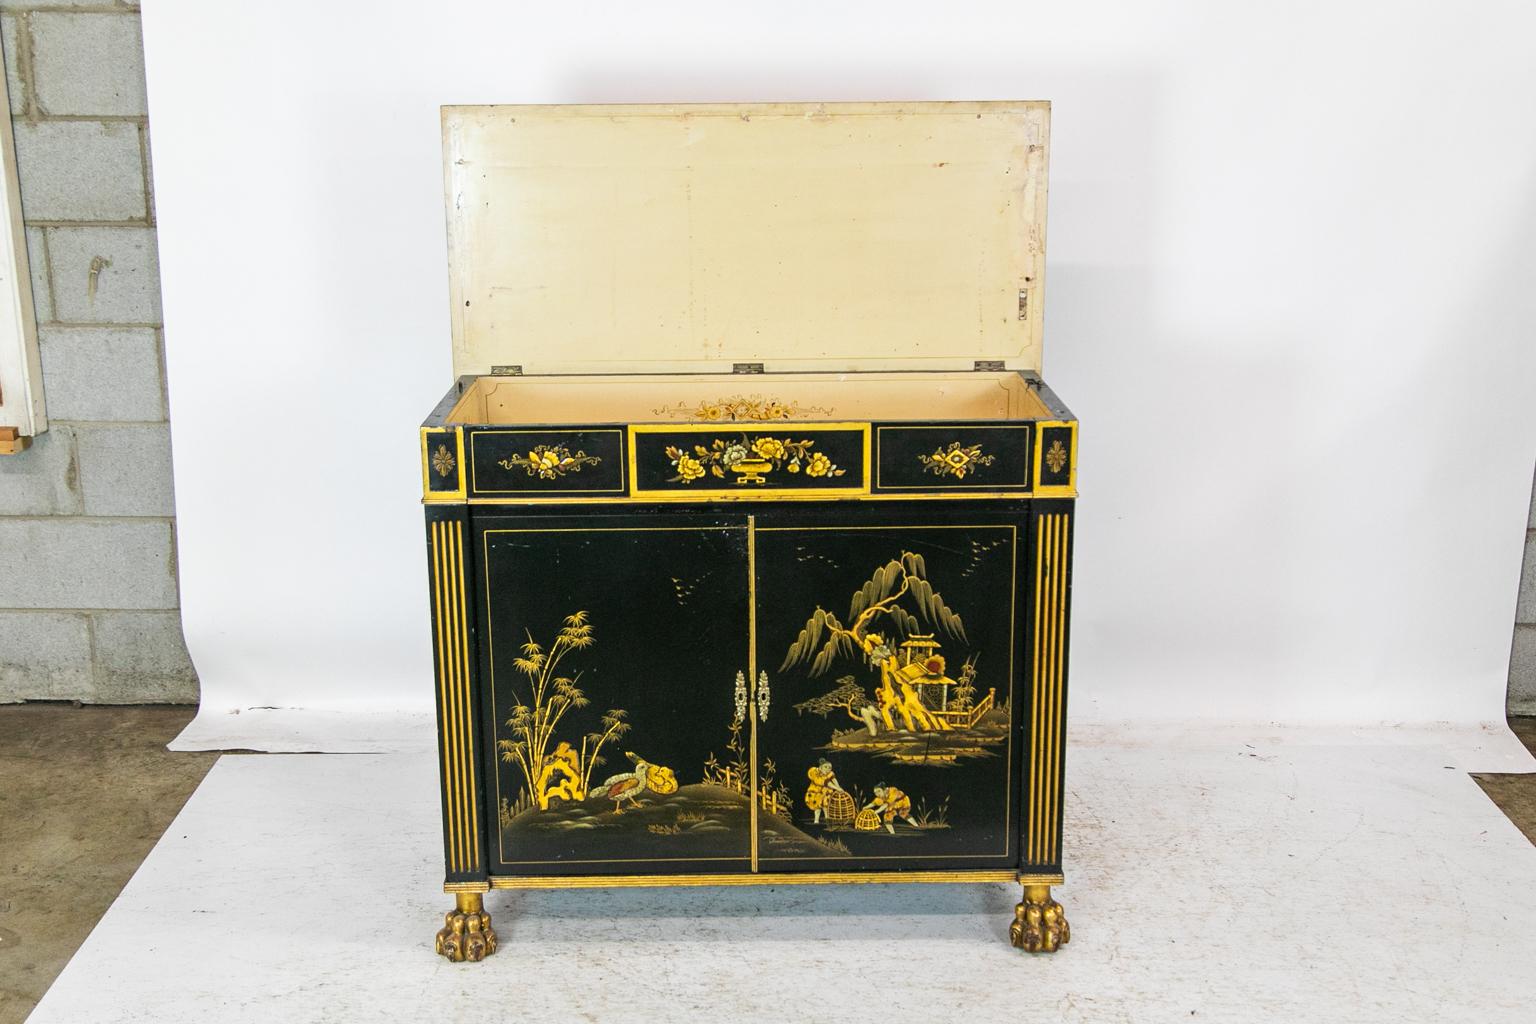 This cabinet has gold chinoiserie decoration with red and green highlights. The frieze has panels painted with an urn with flowers in the center and musical and scroll themes on the side panels. The right-side panel has a bird perched in a floral